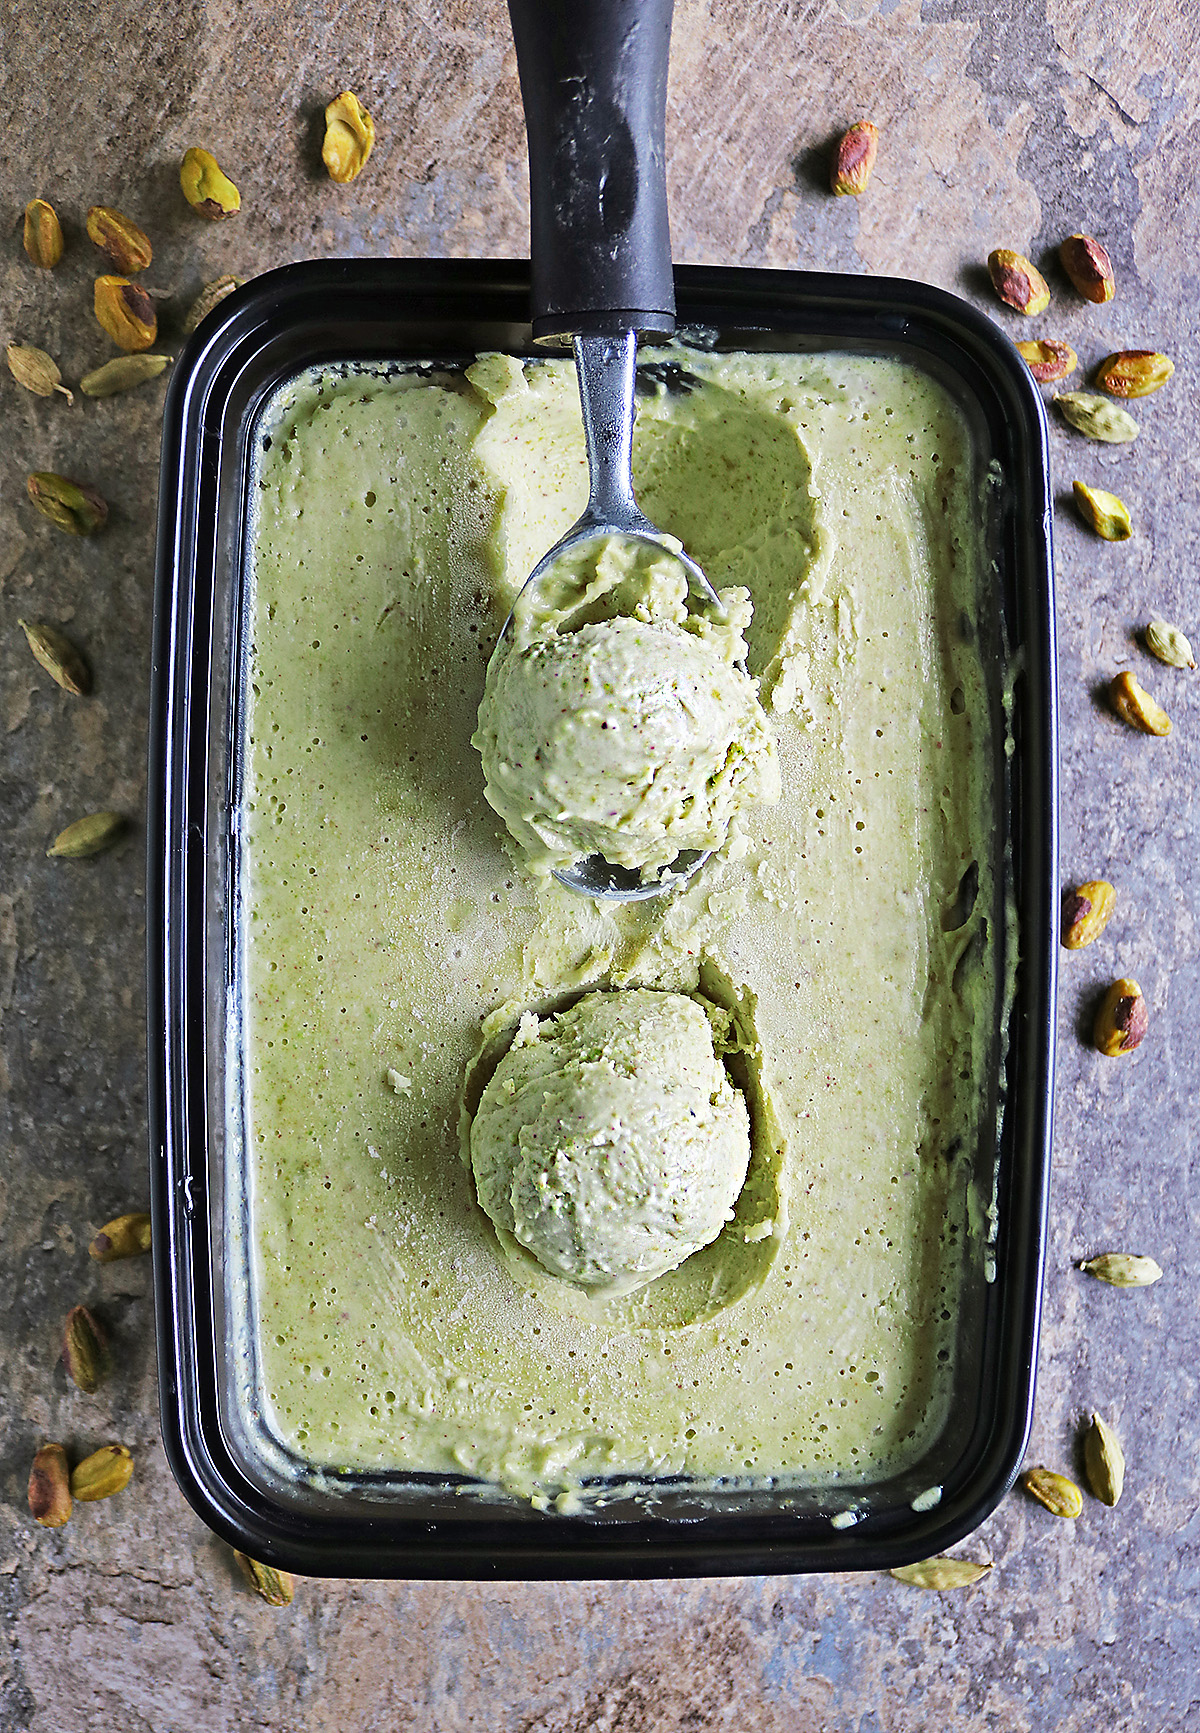 This dairy-free pistachio ice cream is so creamy and full of real pitachio flavor